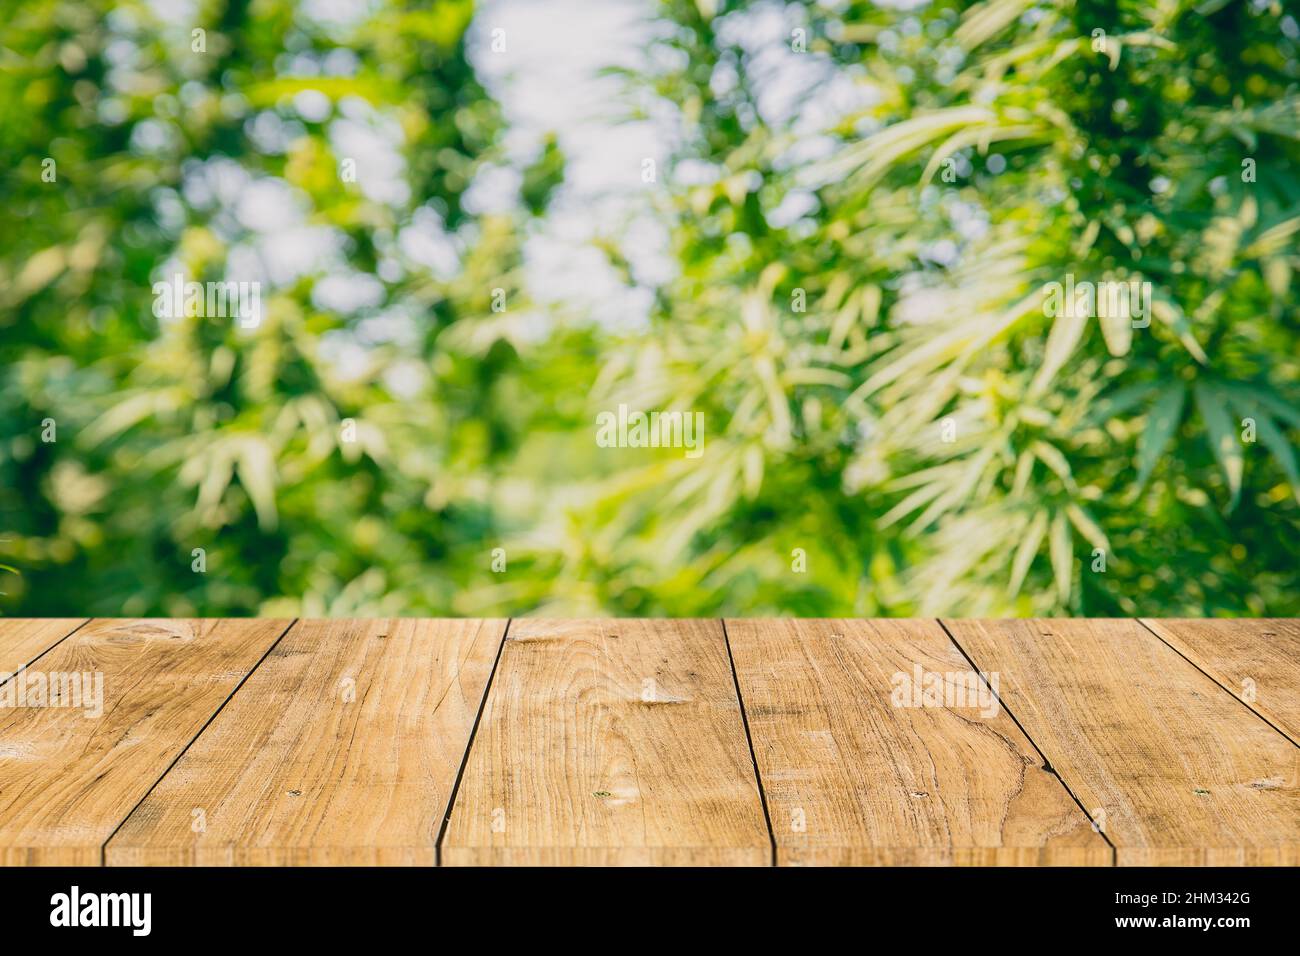 Cannabis sativa or Marijuana green plant with wood table space for hemp oil products montage background Stock Photo